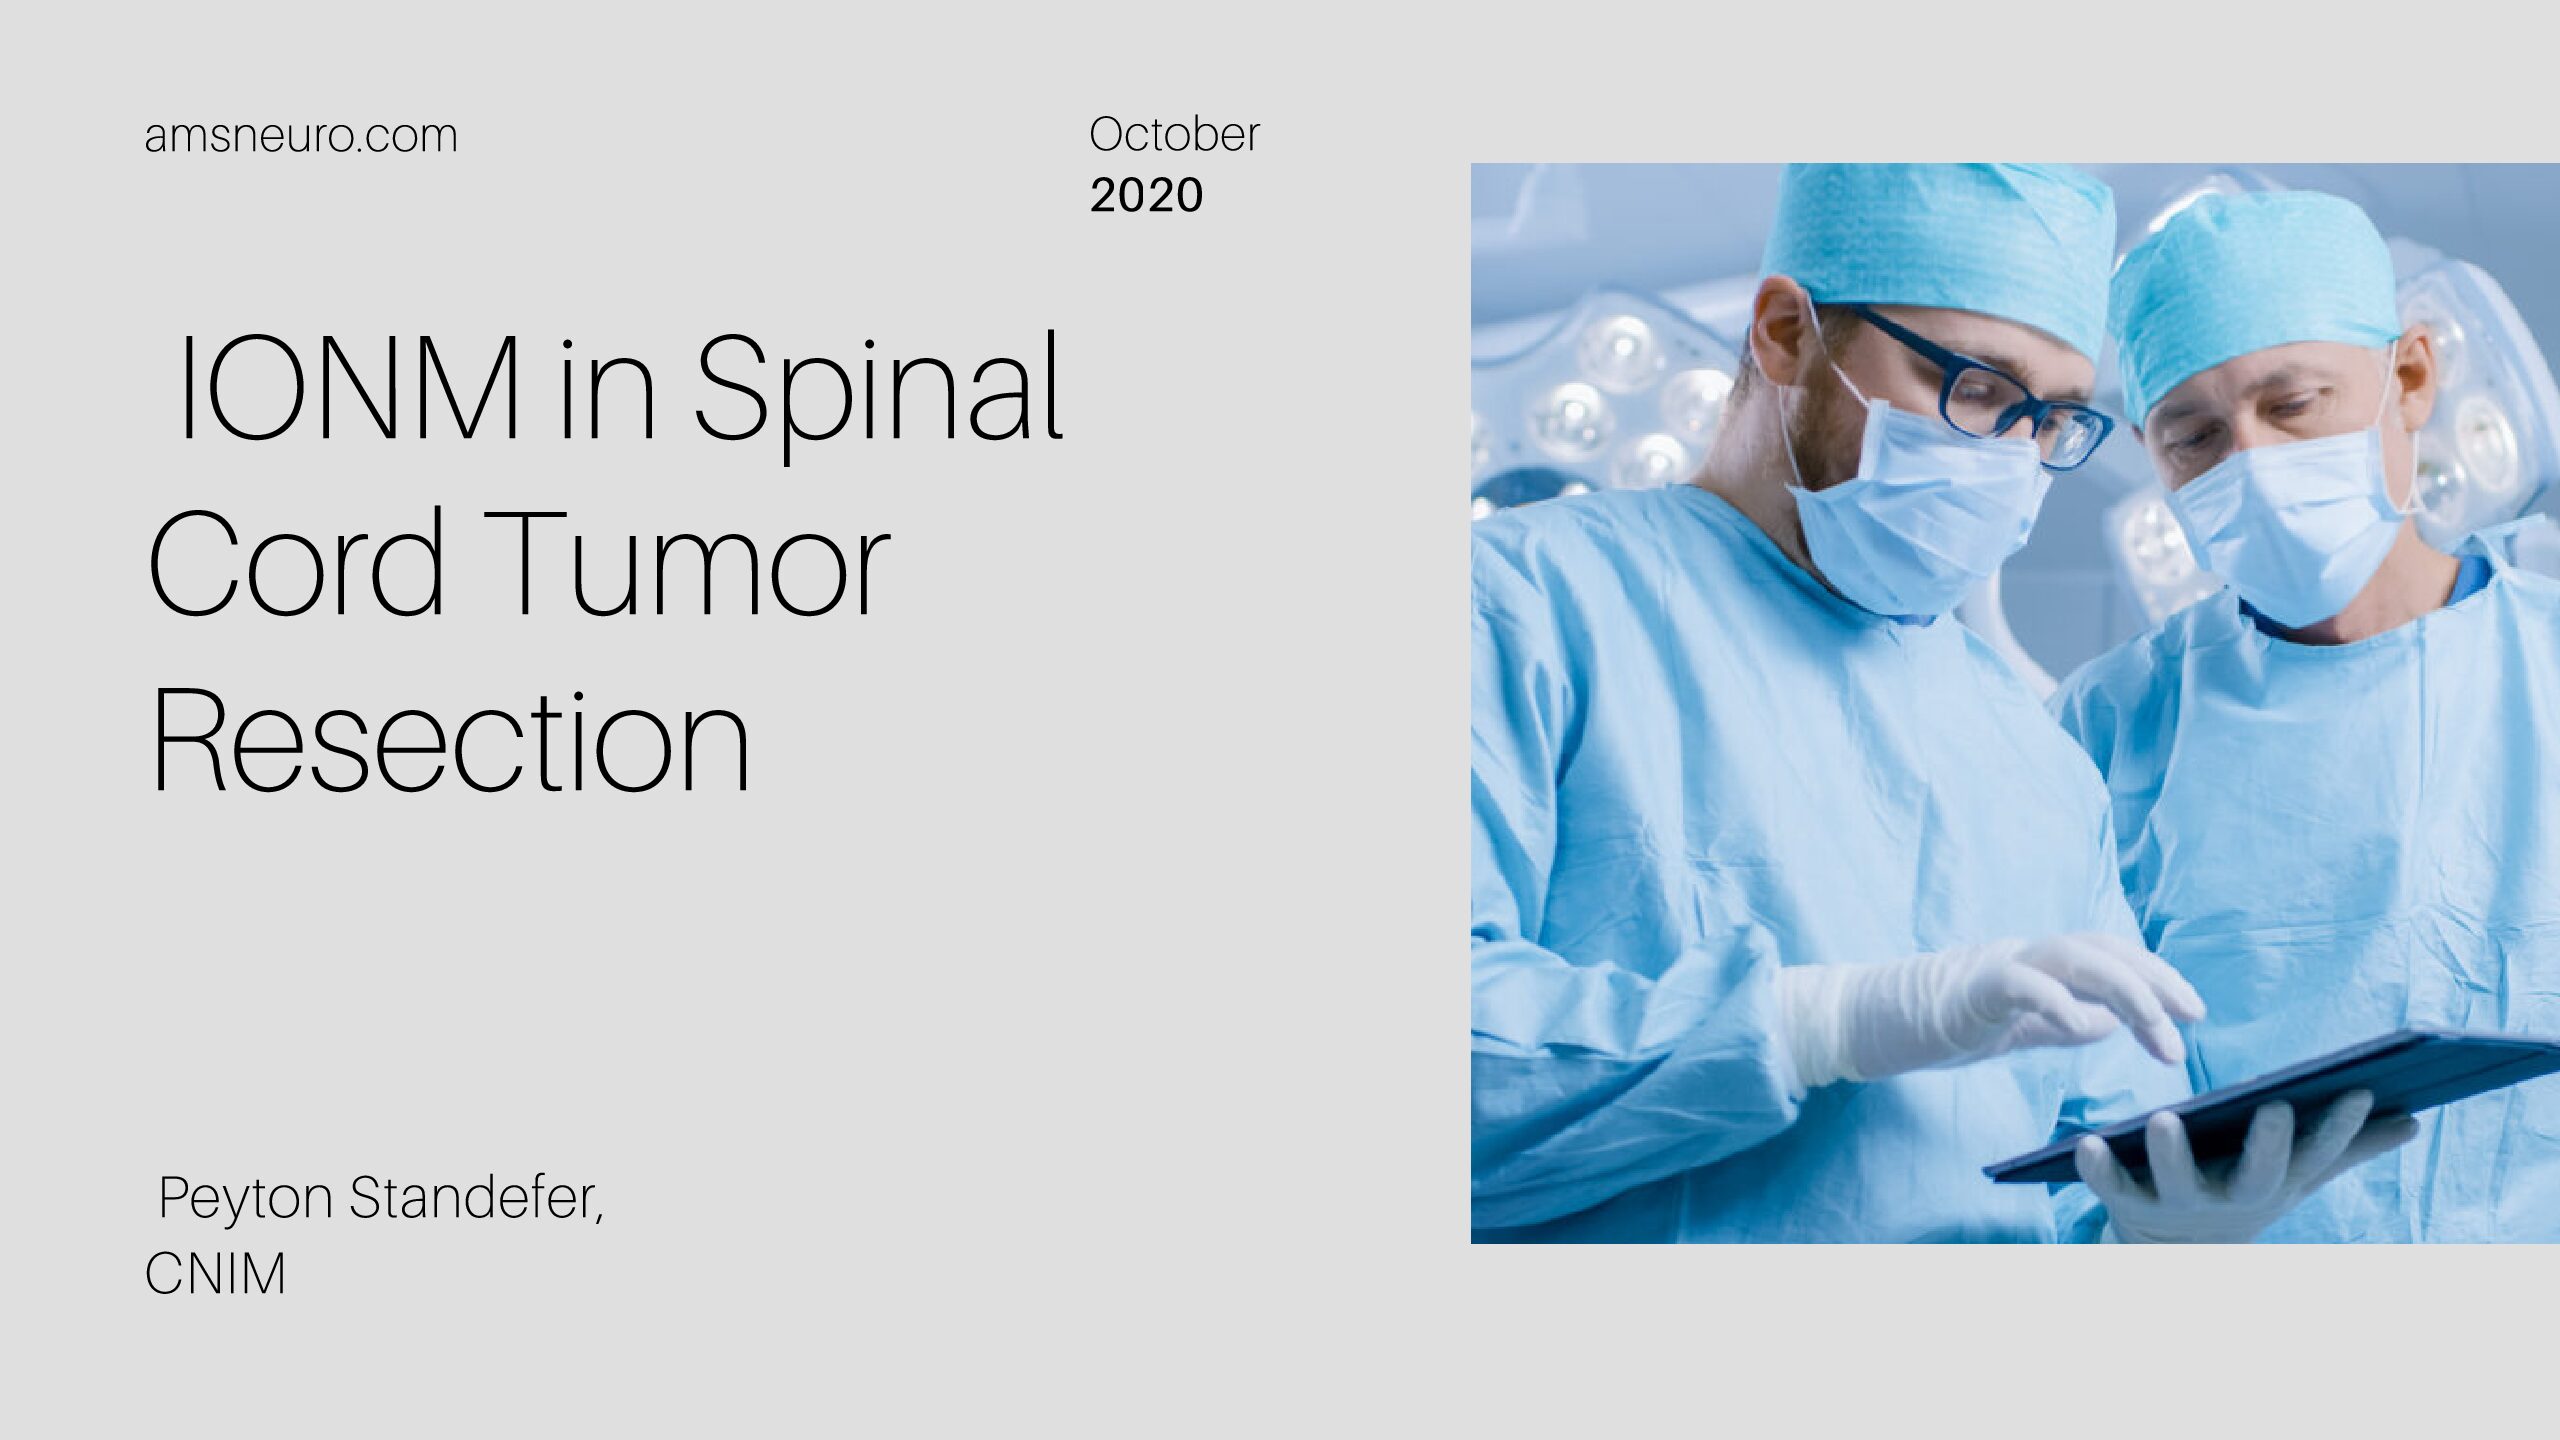 IONM in Spinal Cord Tumor Resection